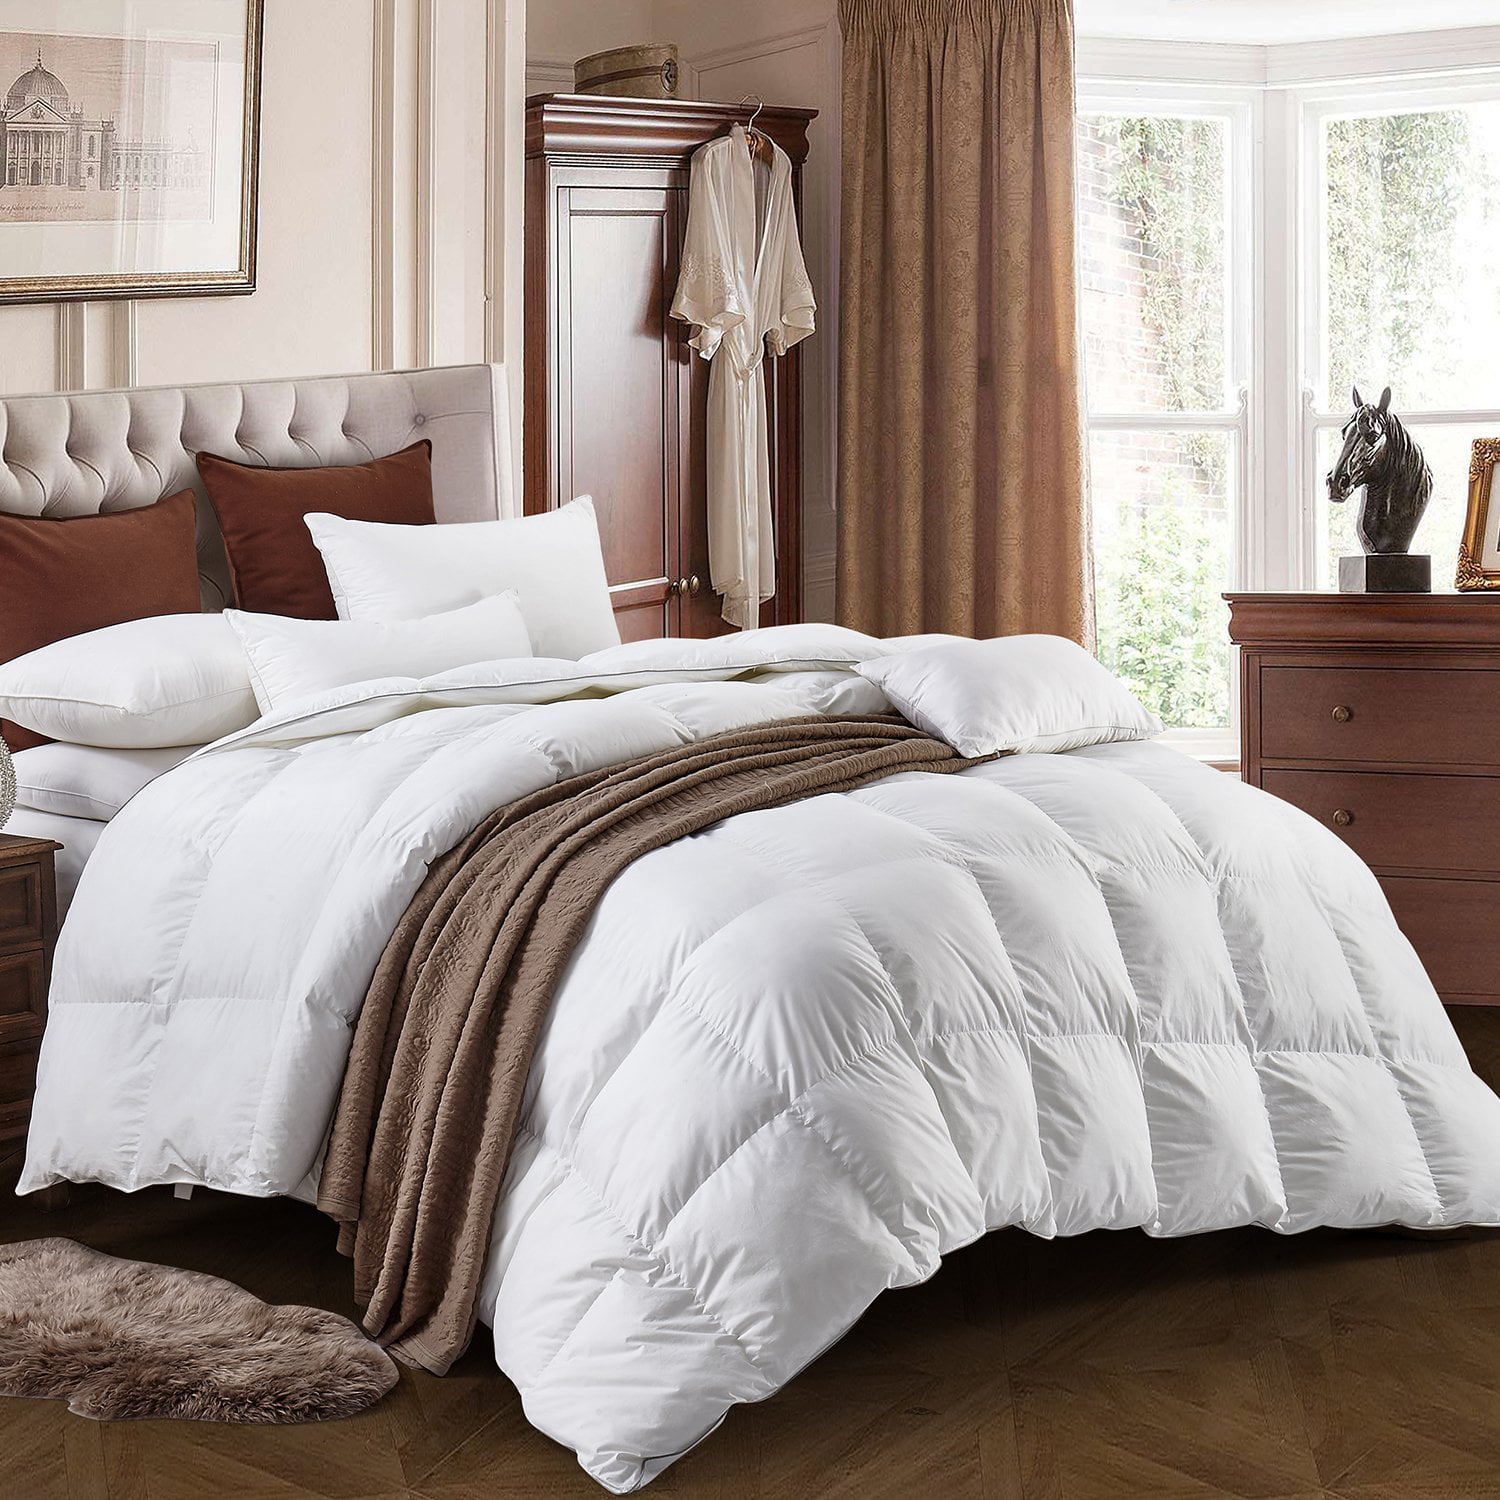 Duvet Insert Queen Size Full Comforters, Can You Put A Duvet Cover On Down Comforter